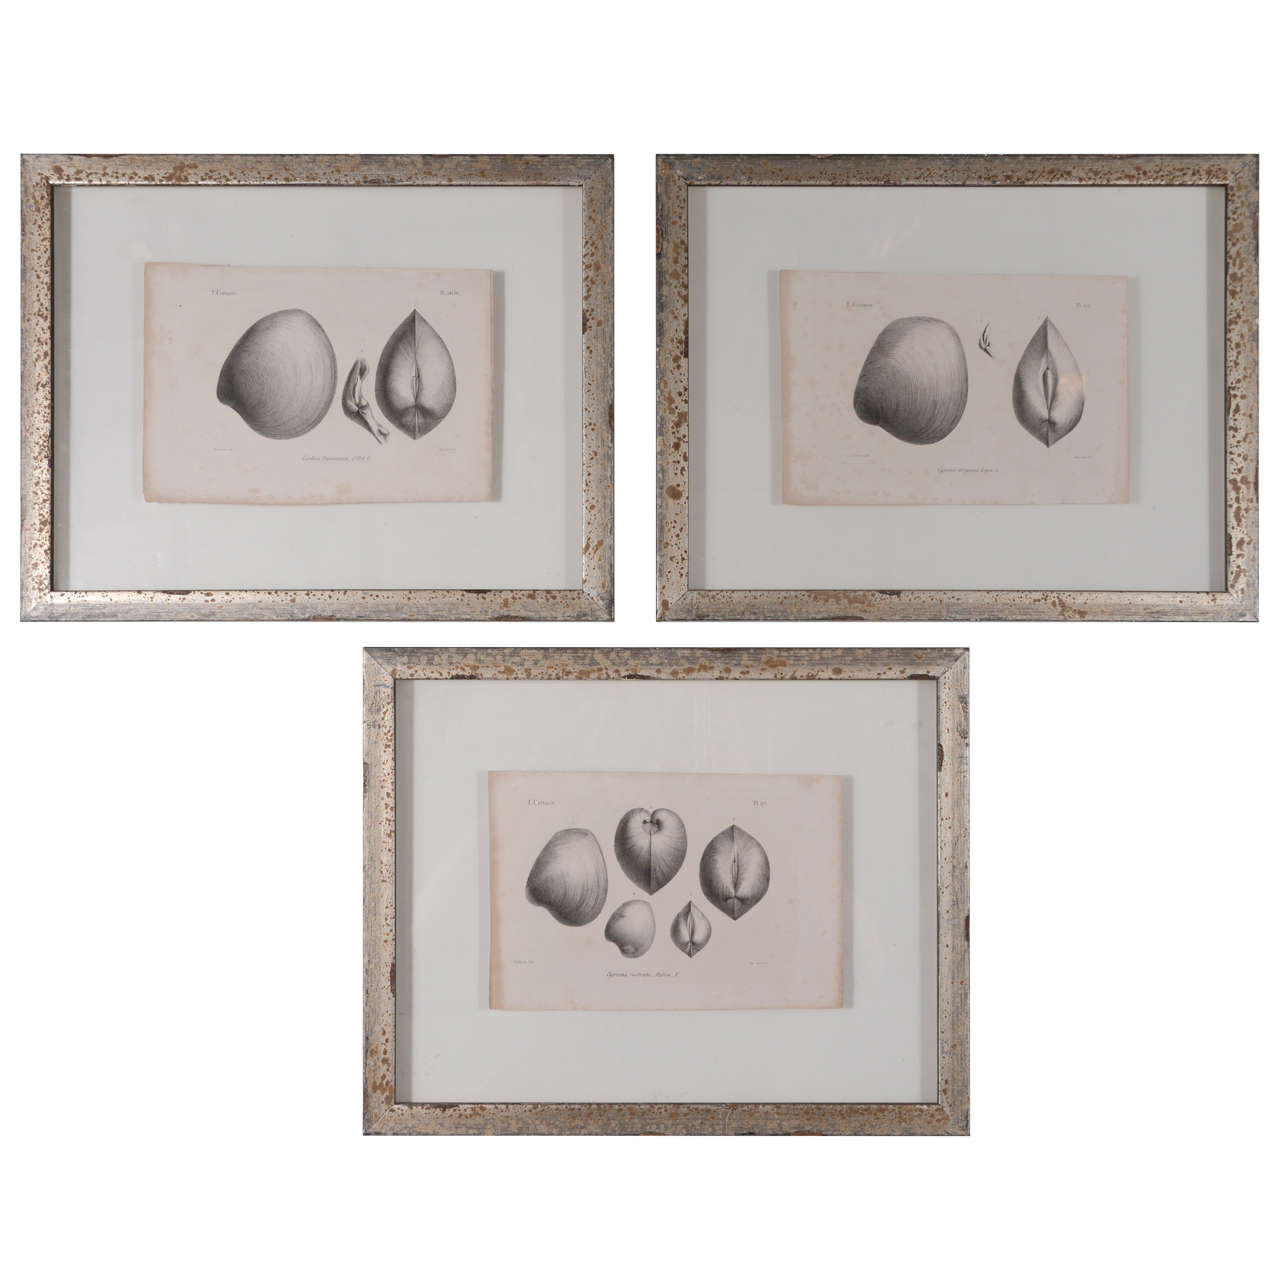 Set of 3 19th Century Black and White Seashell Engravings For Sale